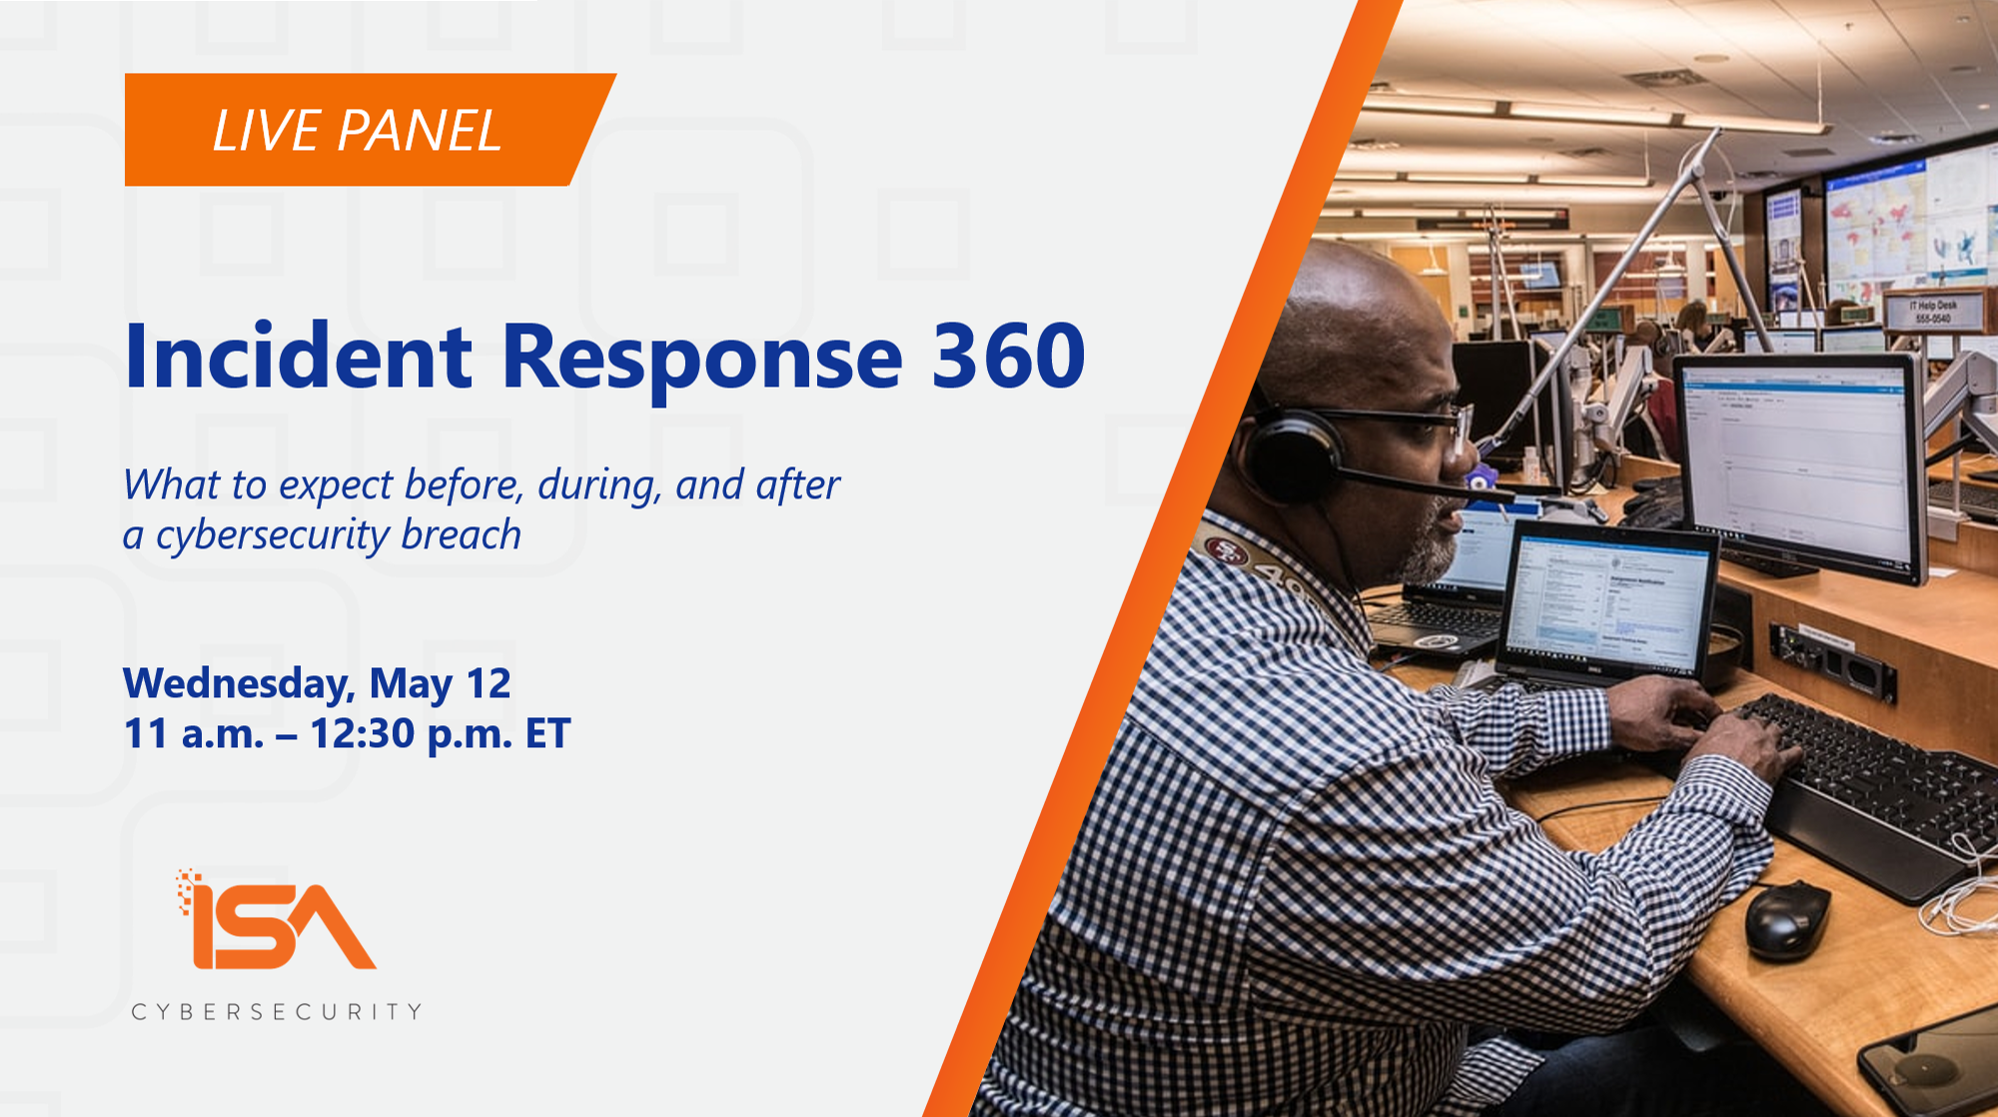 Cybersecurity Incident Response 360 panel discussion